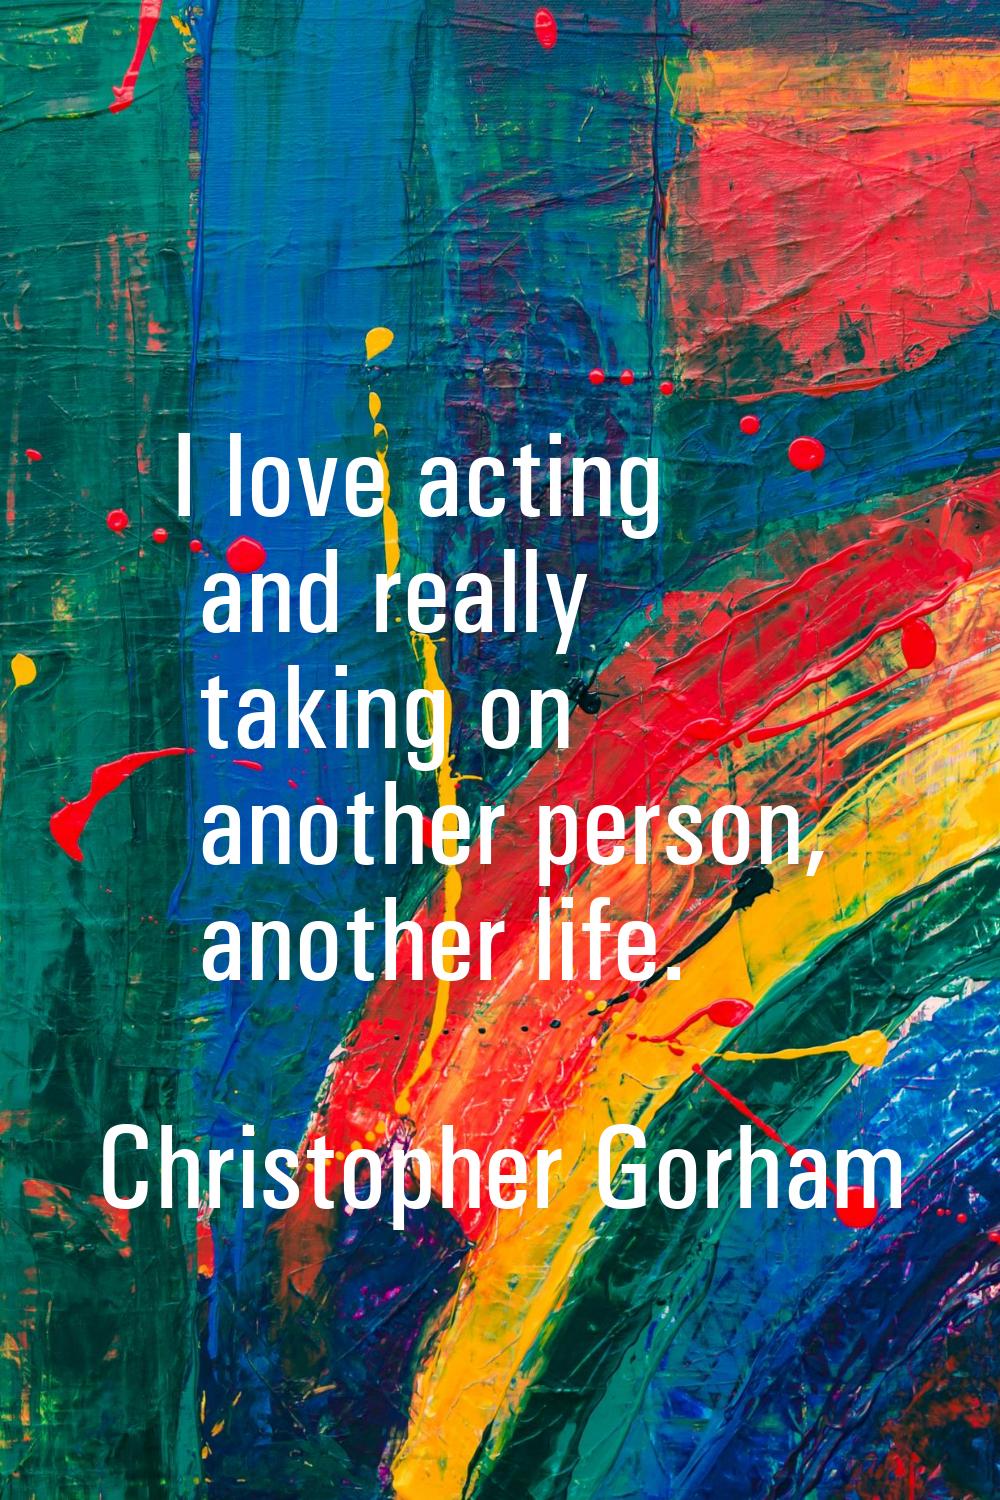 I love acting and really taking on another person, another life.